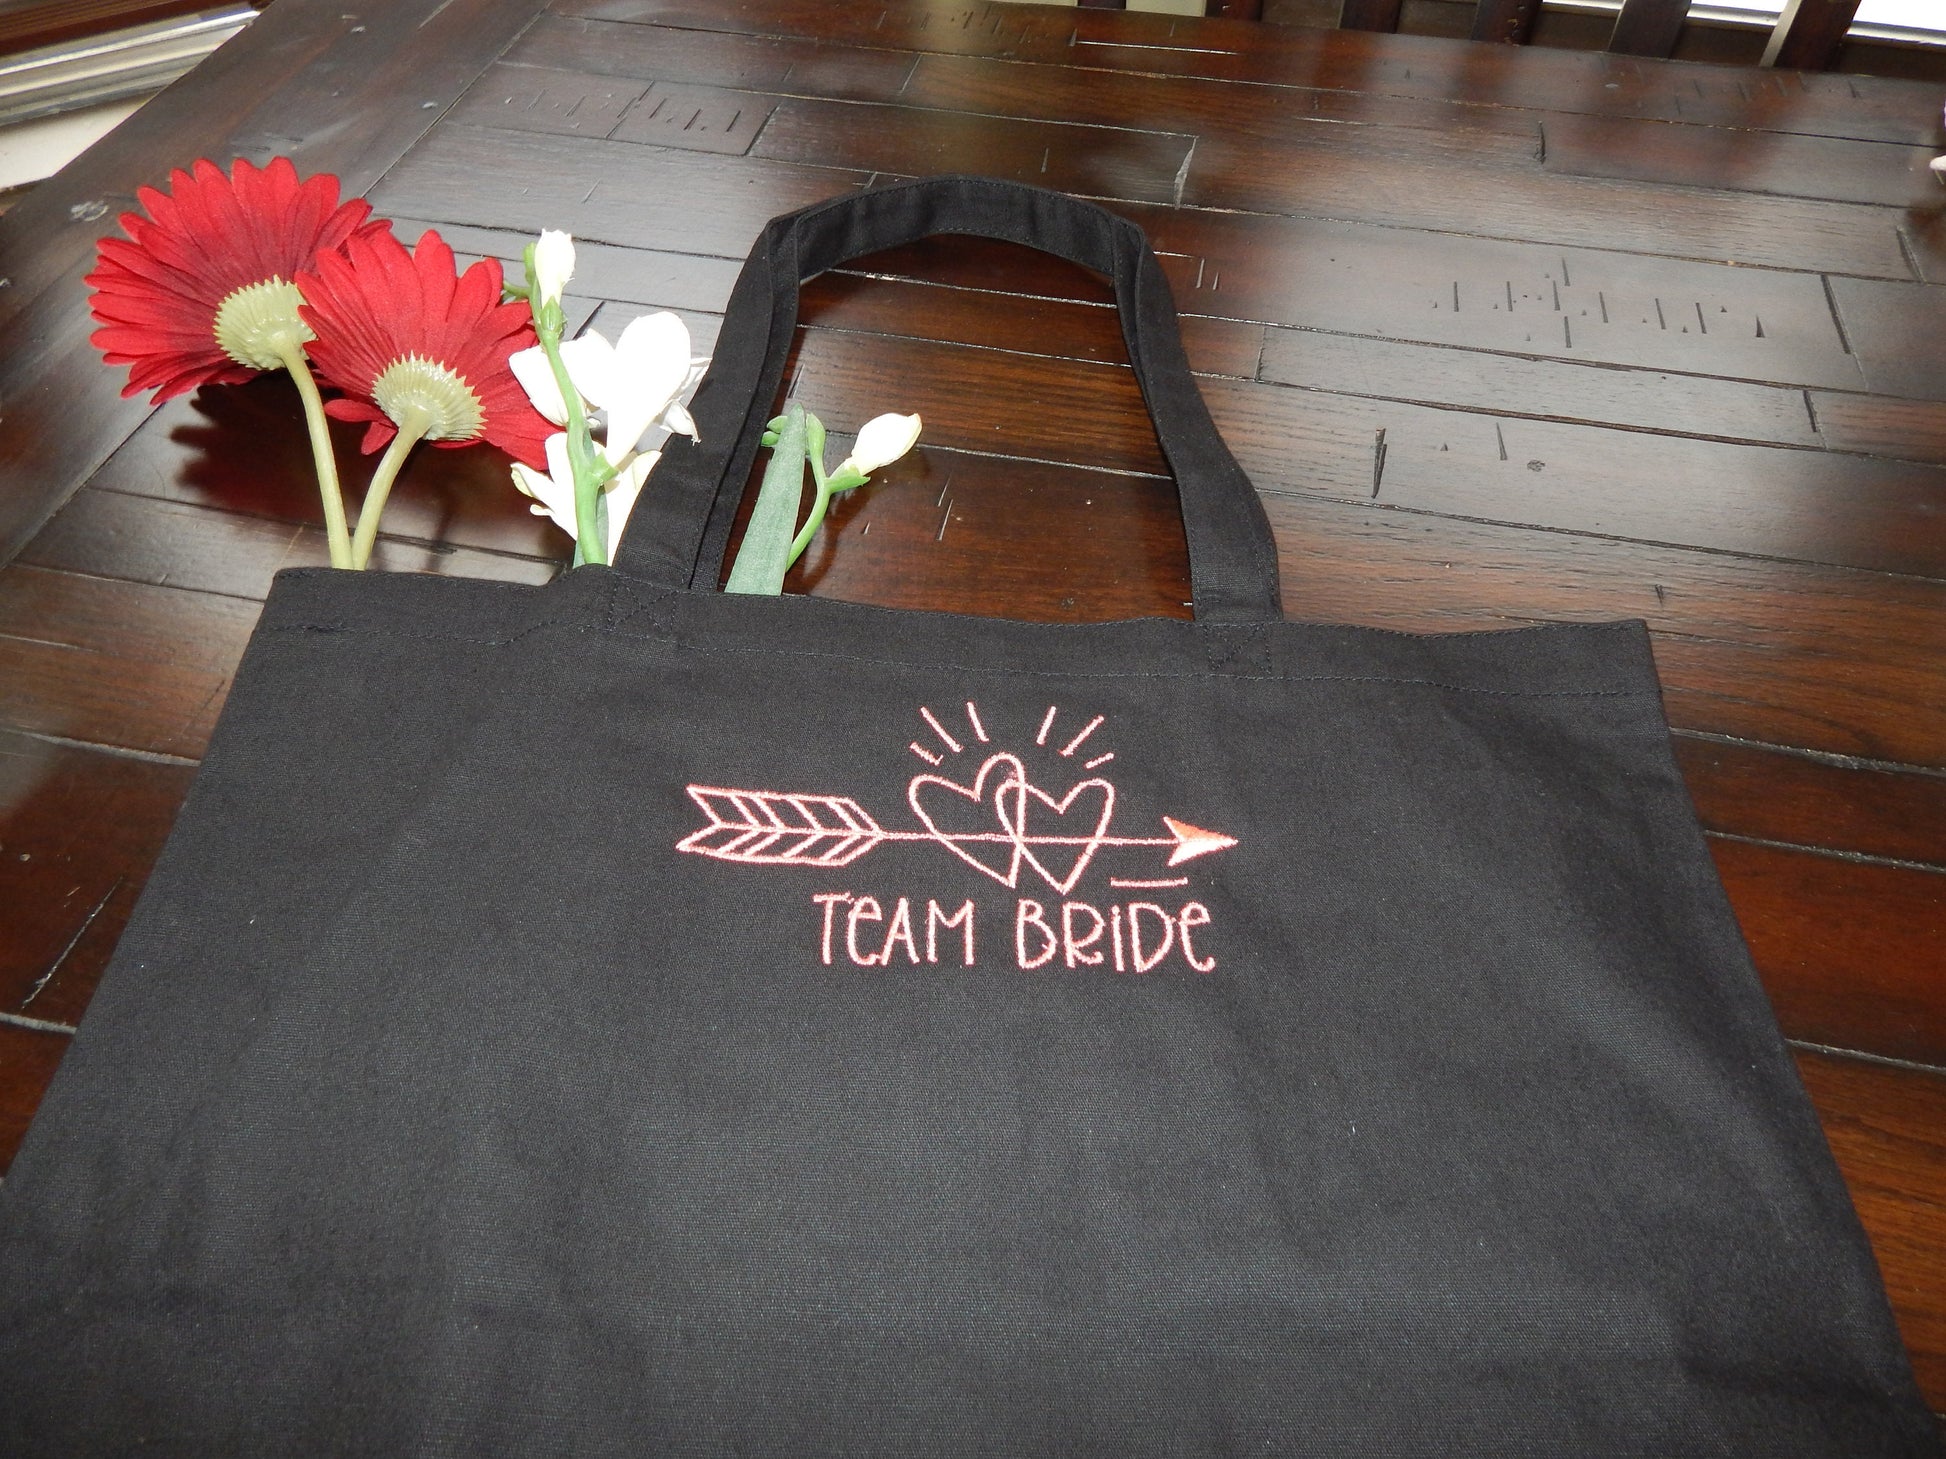 Personalized Wedding Canvas Gift Tote Bags, Bride Tribe